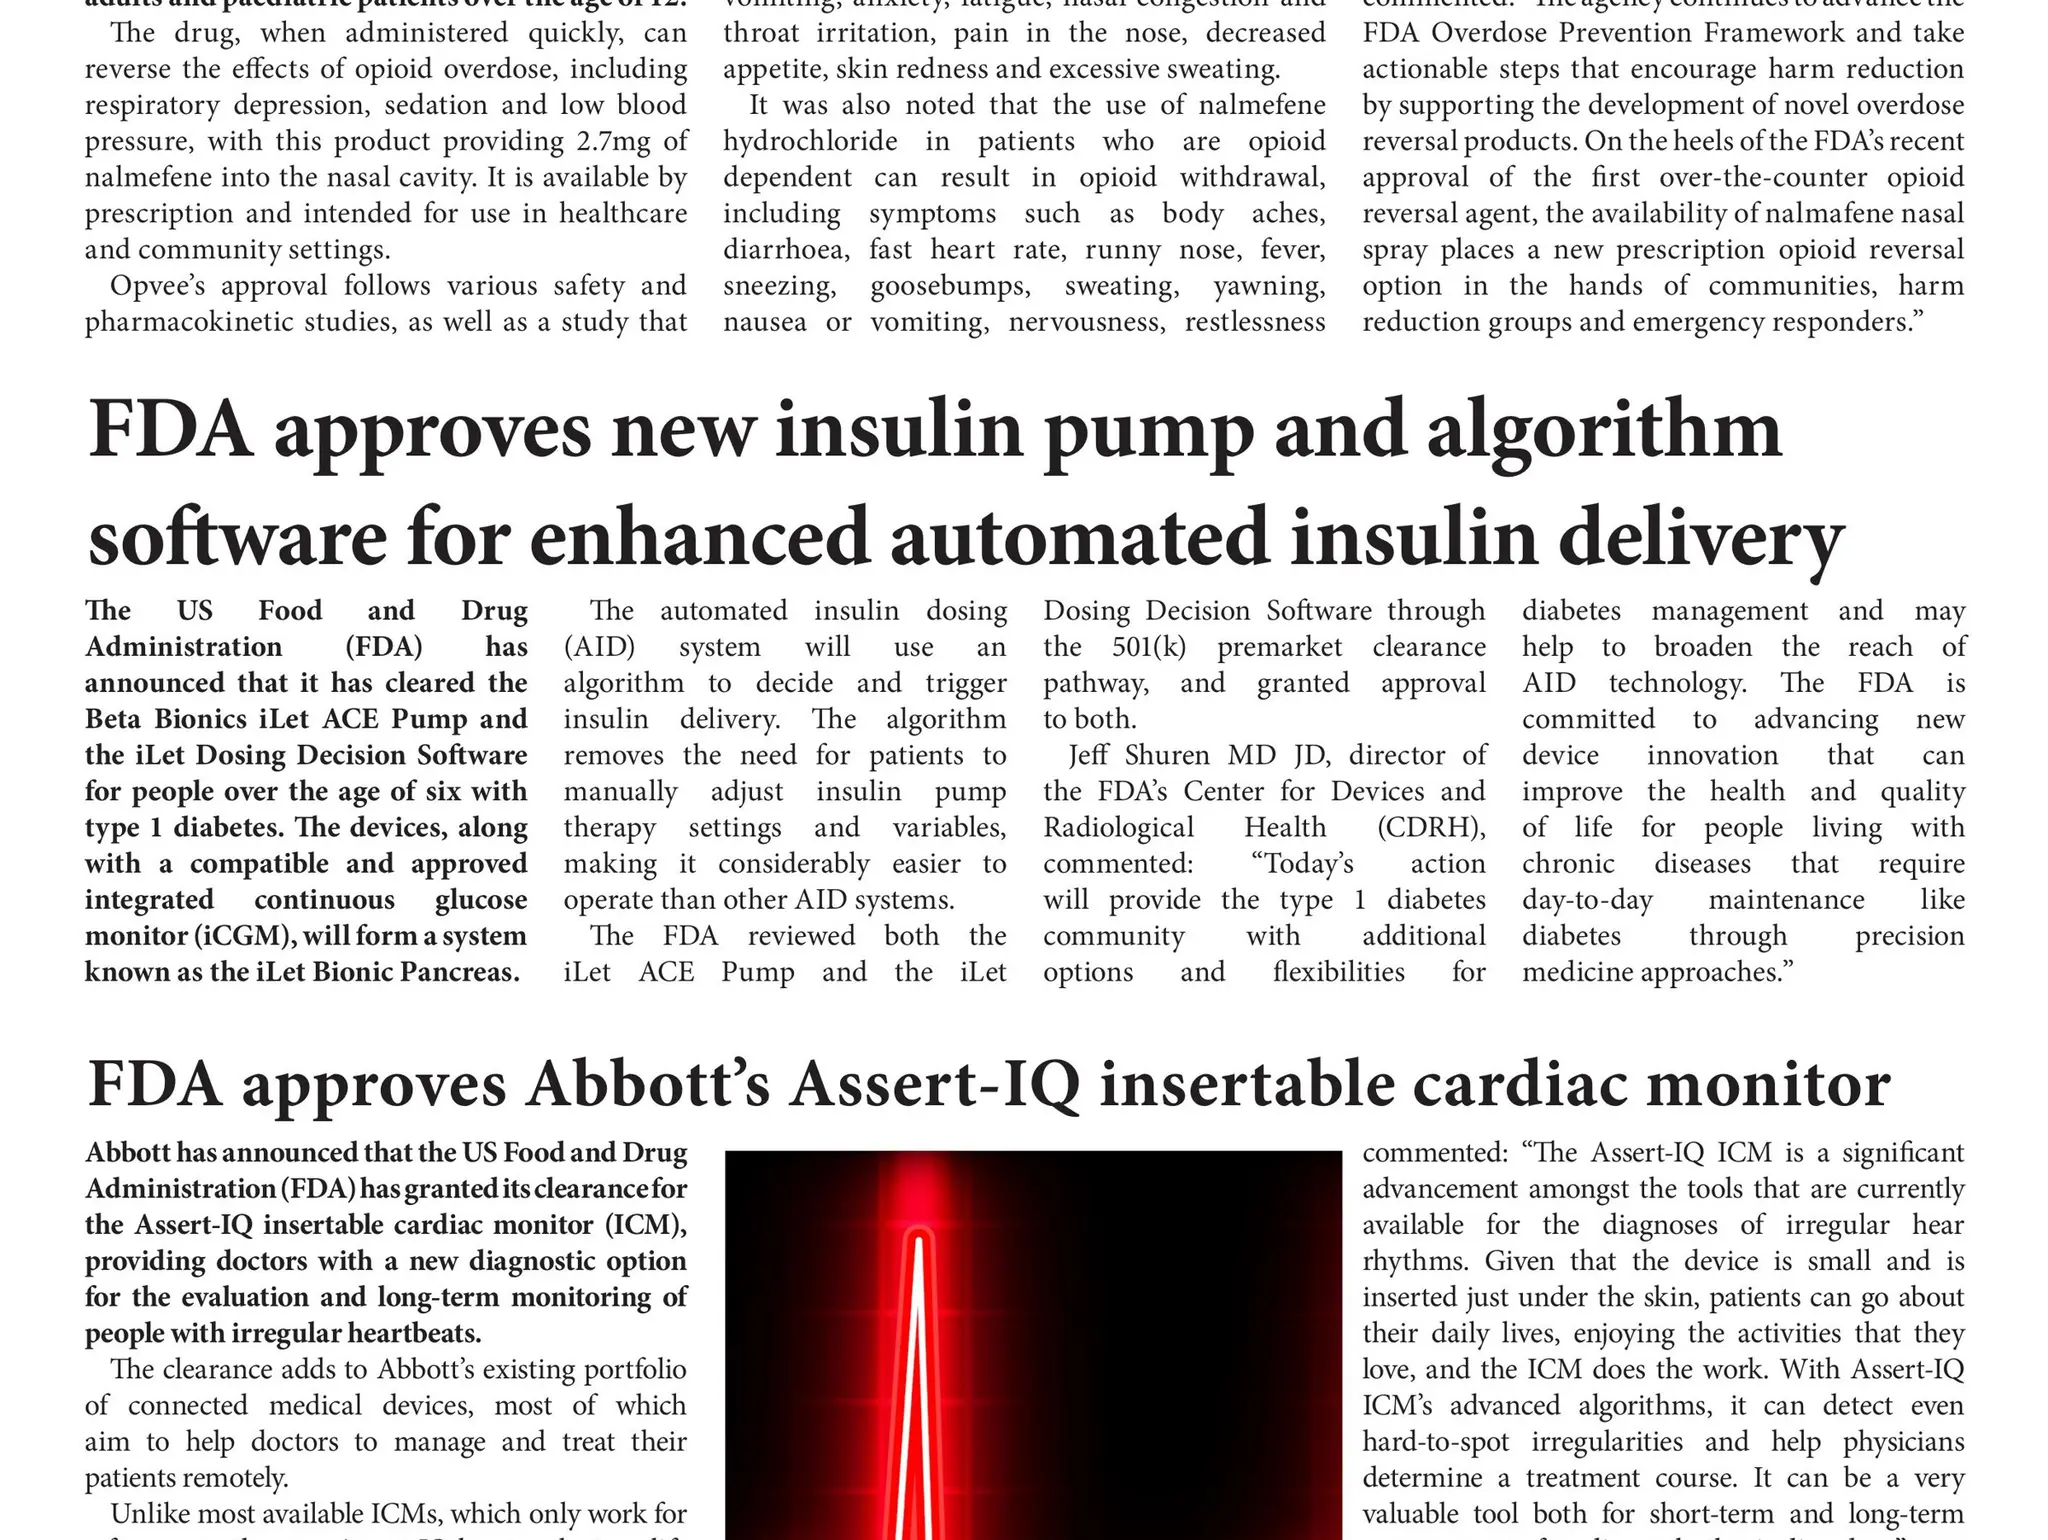 FDA approves new insulin pump and algorithm software for enhanced automated insulin delivery